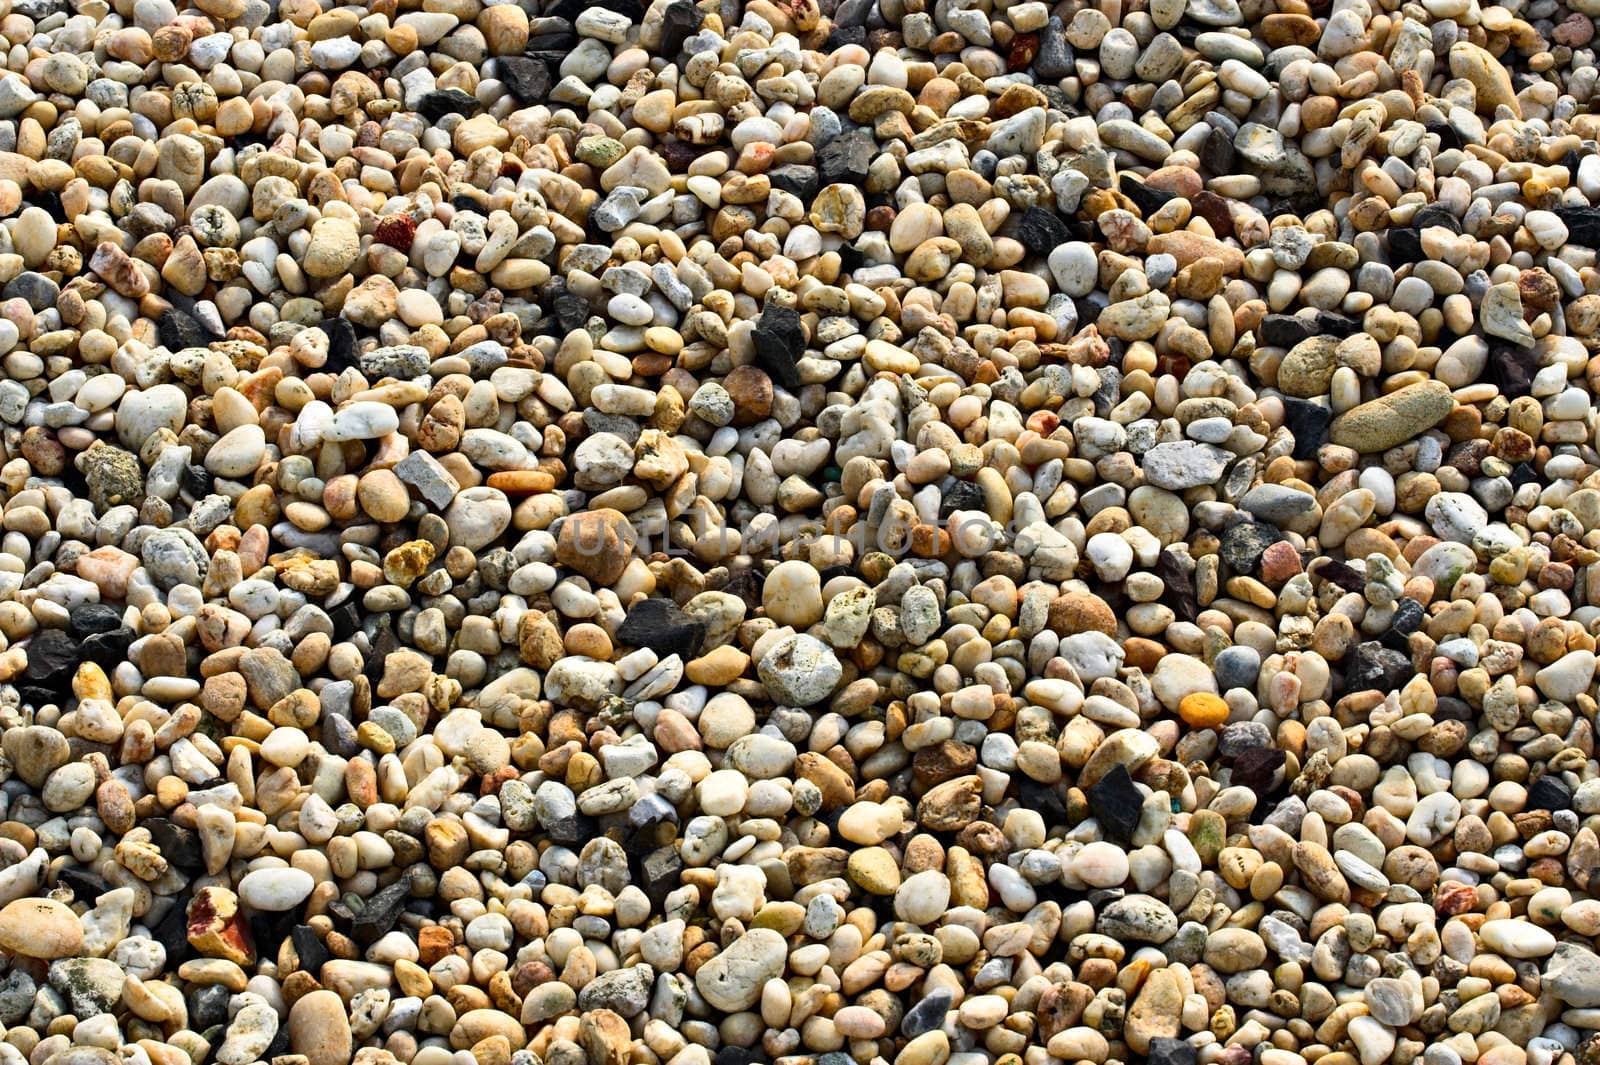 Small pebbles of different colors filling the entire frame